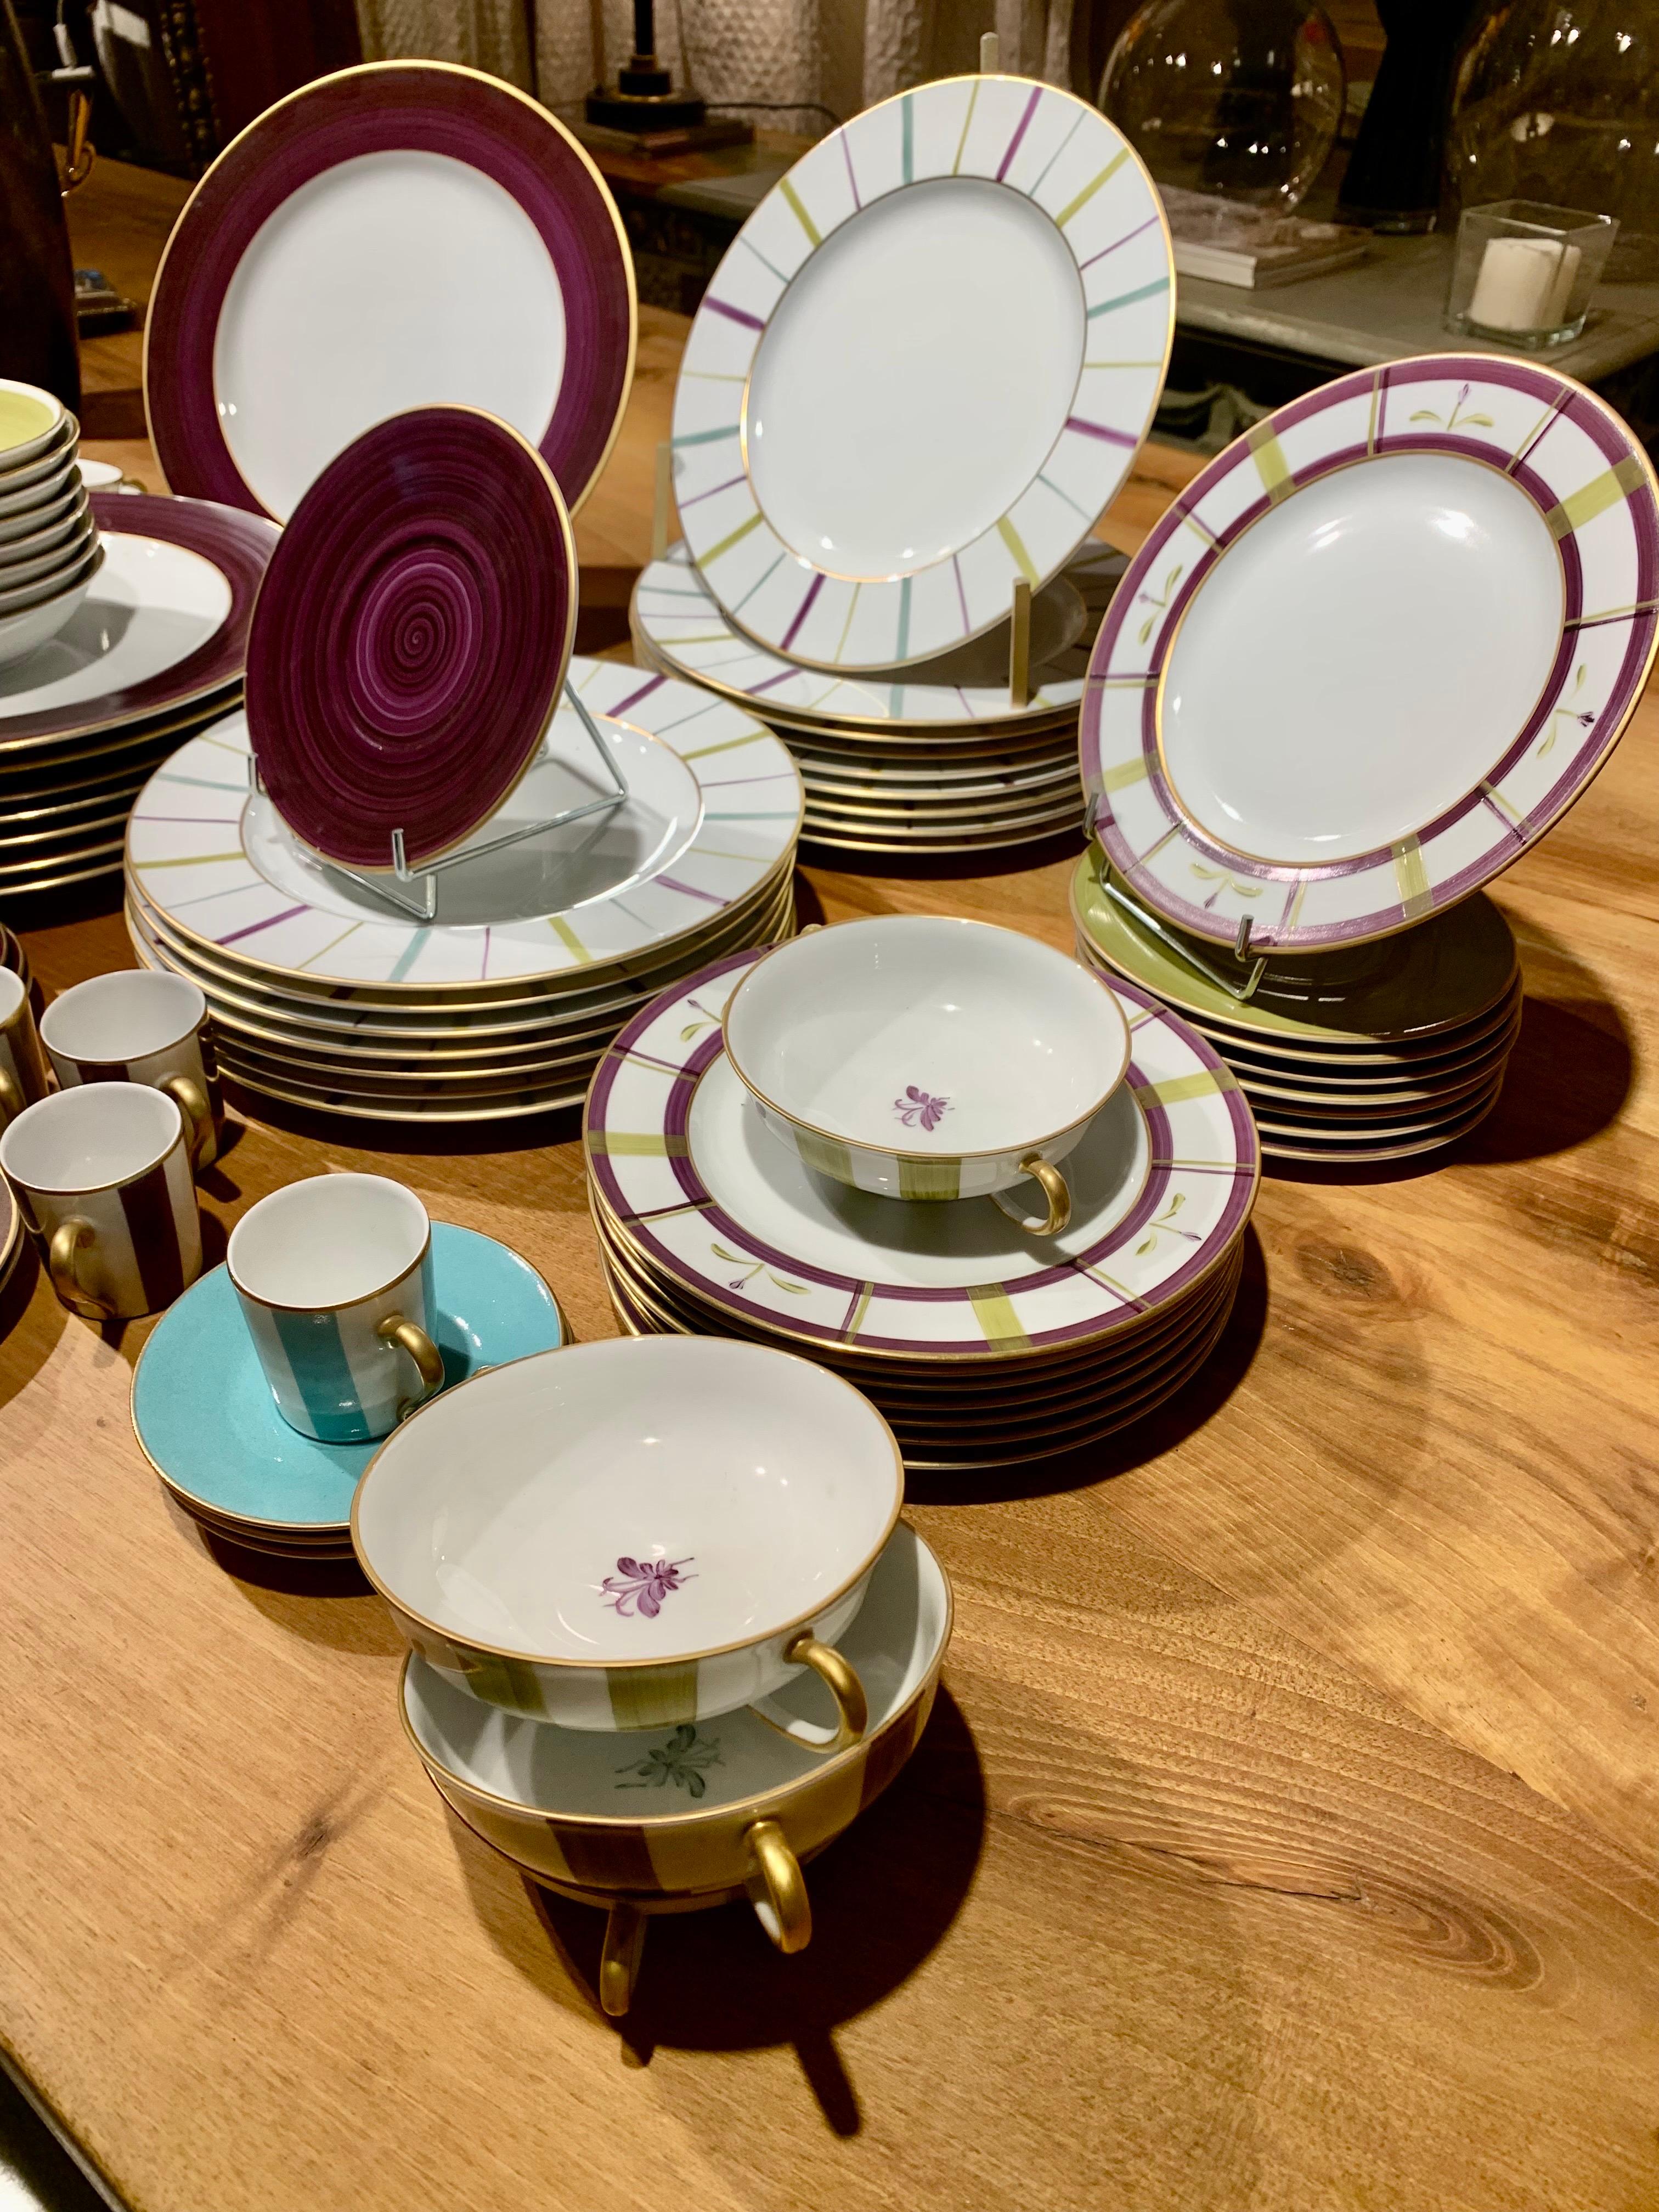 Made exclusively of Limoges porcelain, Marie Daâge's collections are some of the last to be painted entirely by hand in differents colours. All are from families in Limoges, France that have painted for generations using traditional methods of